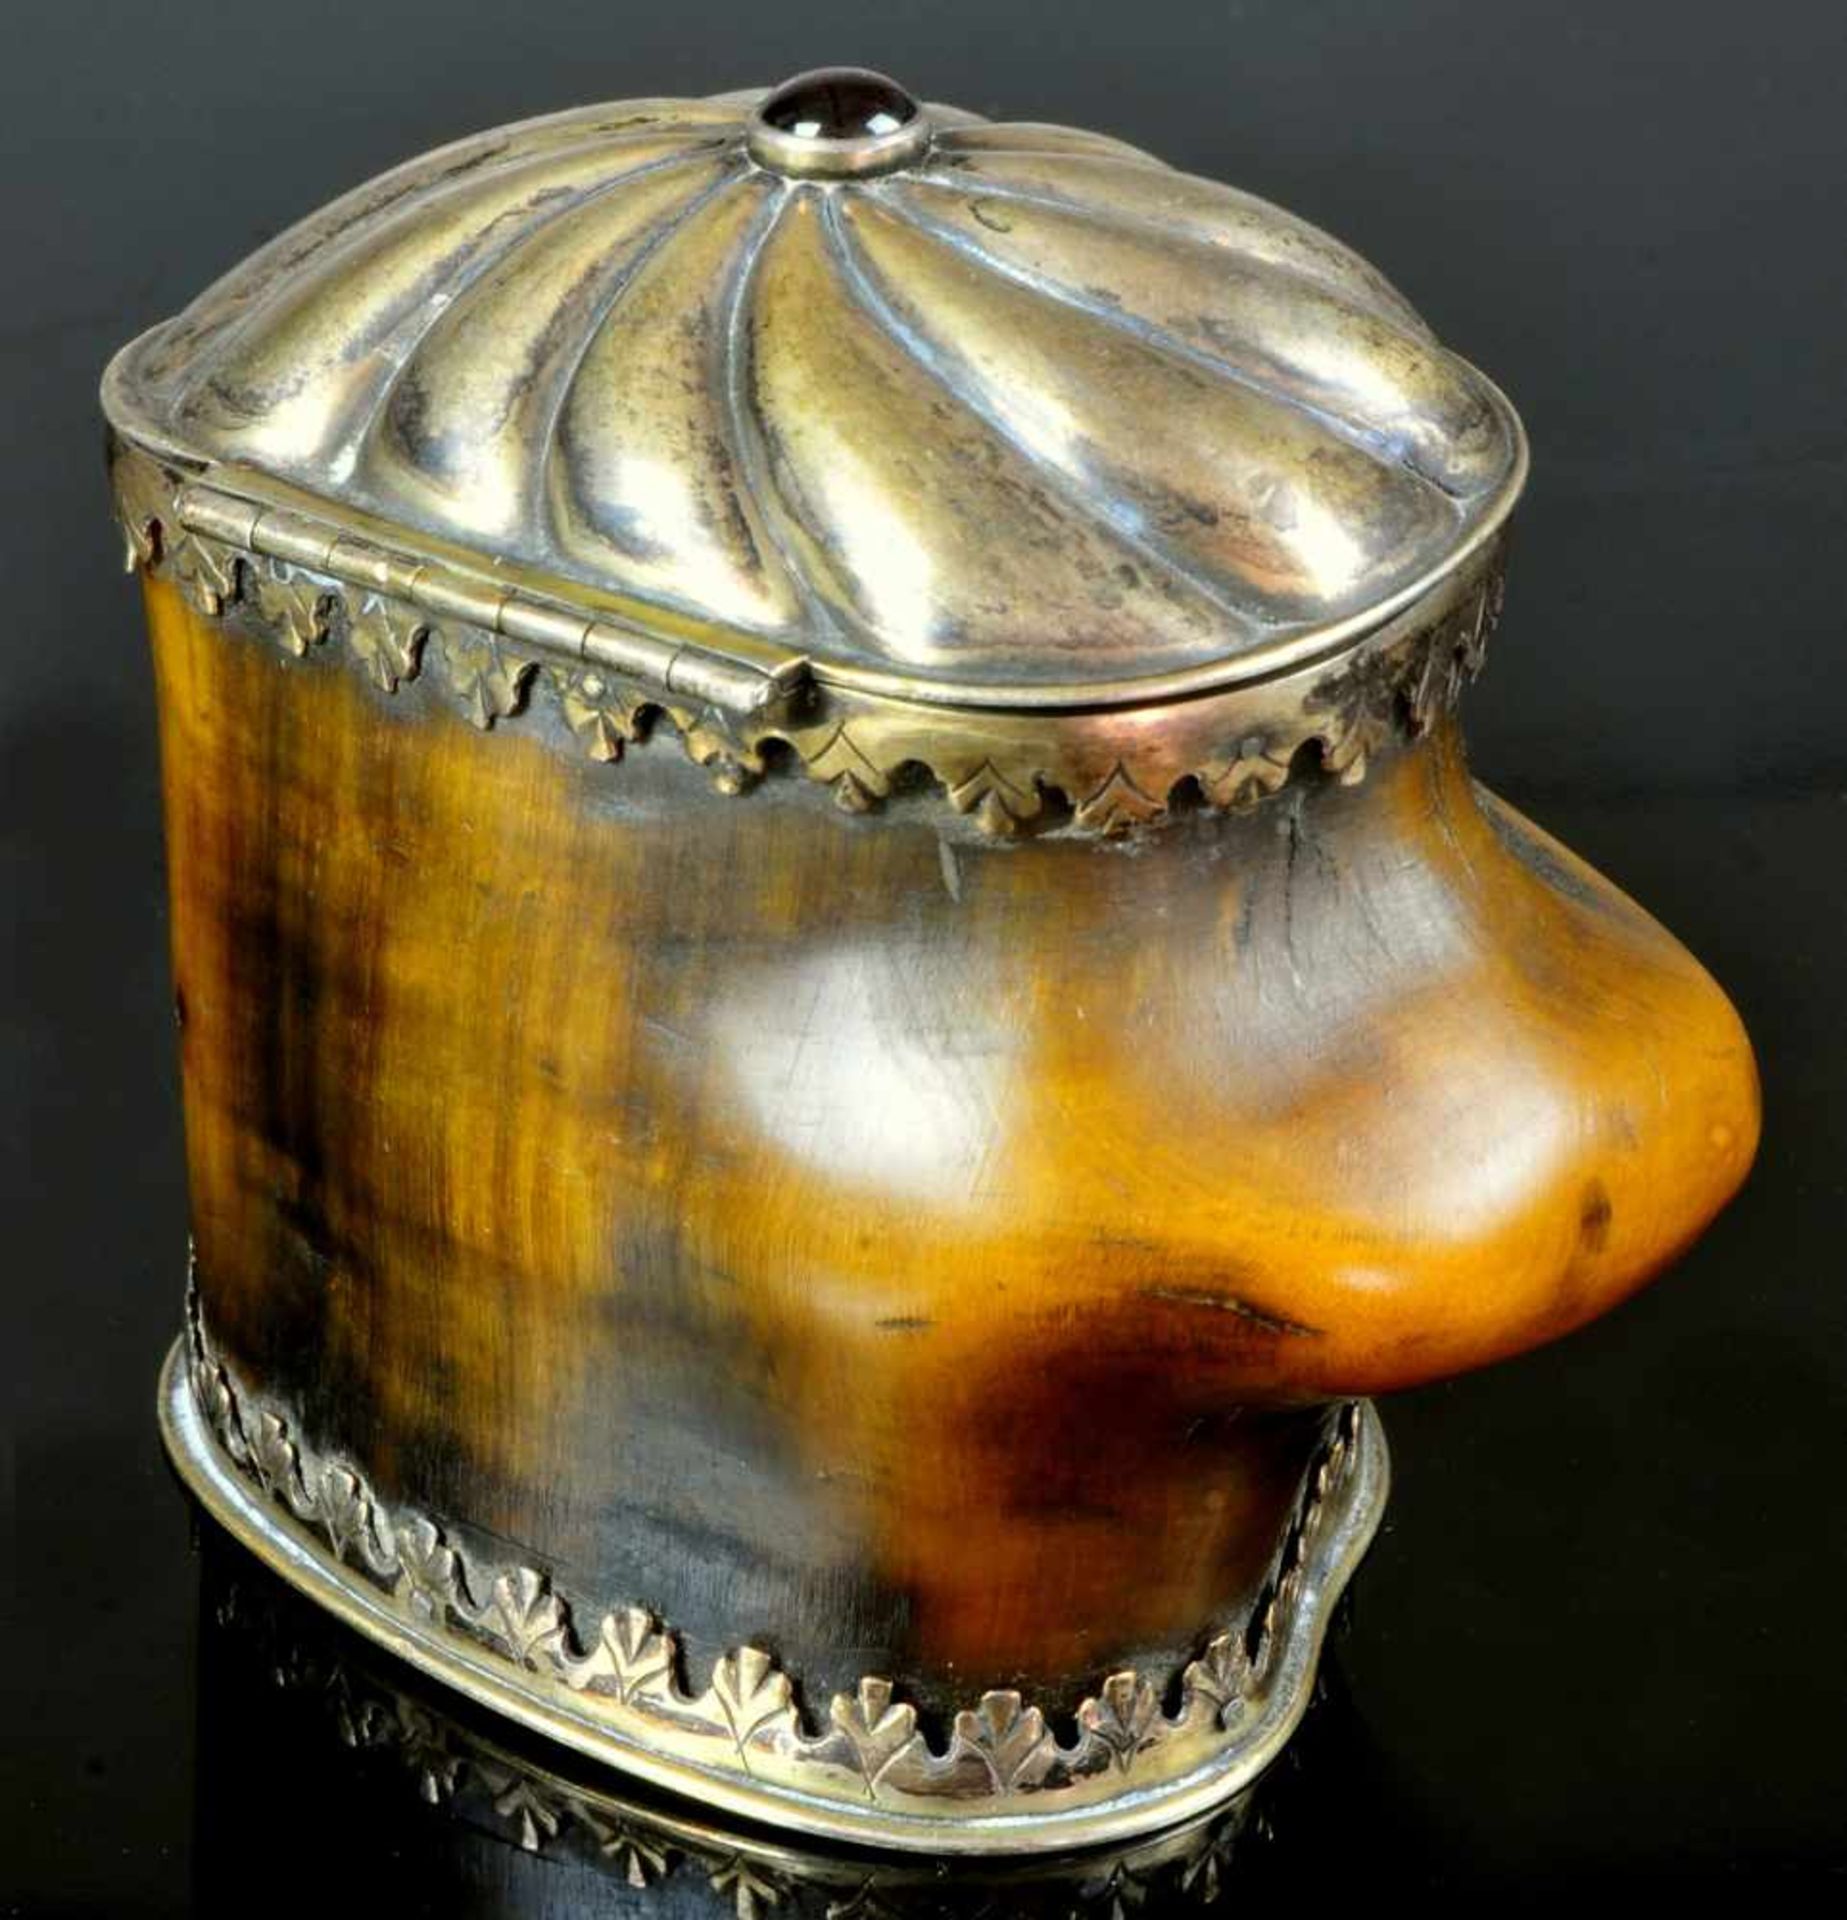 A GERMAN SILVER MOUNTED SNUFF BOX OF STEINBOCK HORN, MID TO LATE 18TH CENTURY.Origin: Germany, - Bild 4 aus 11